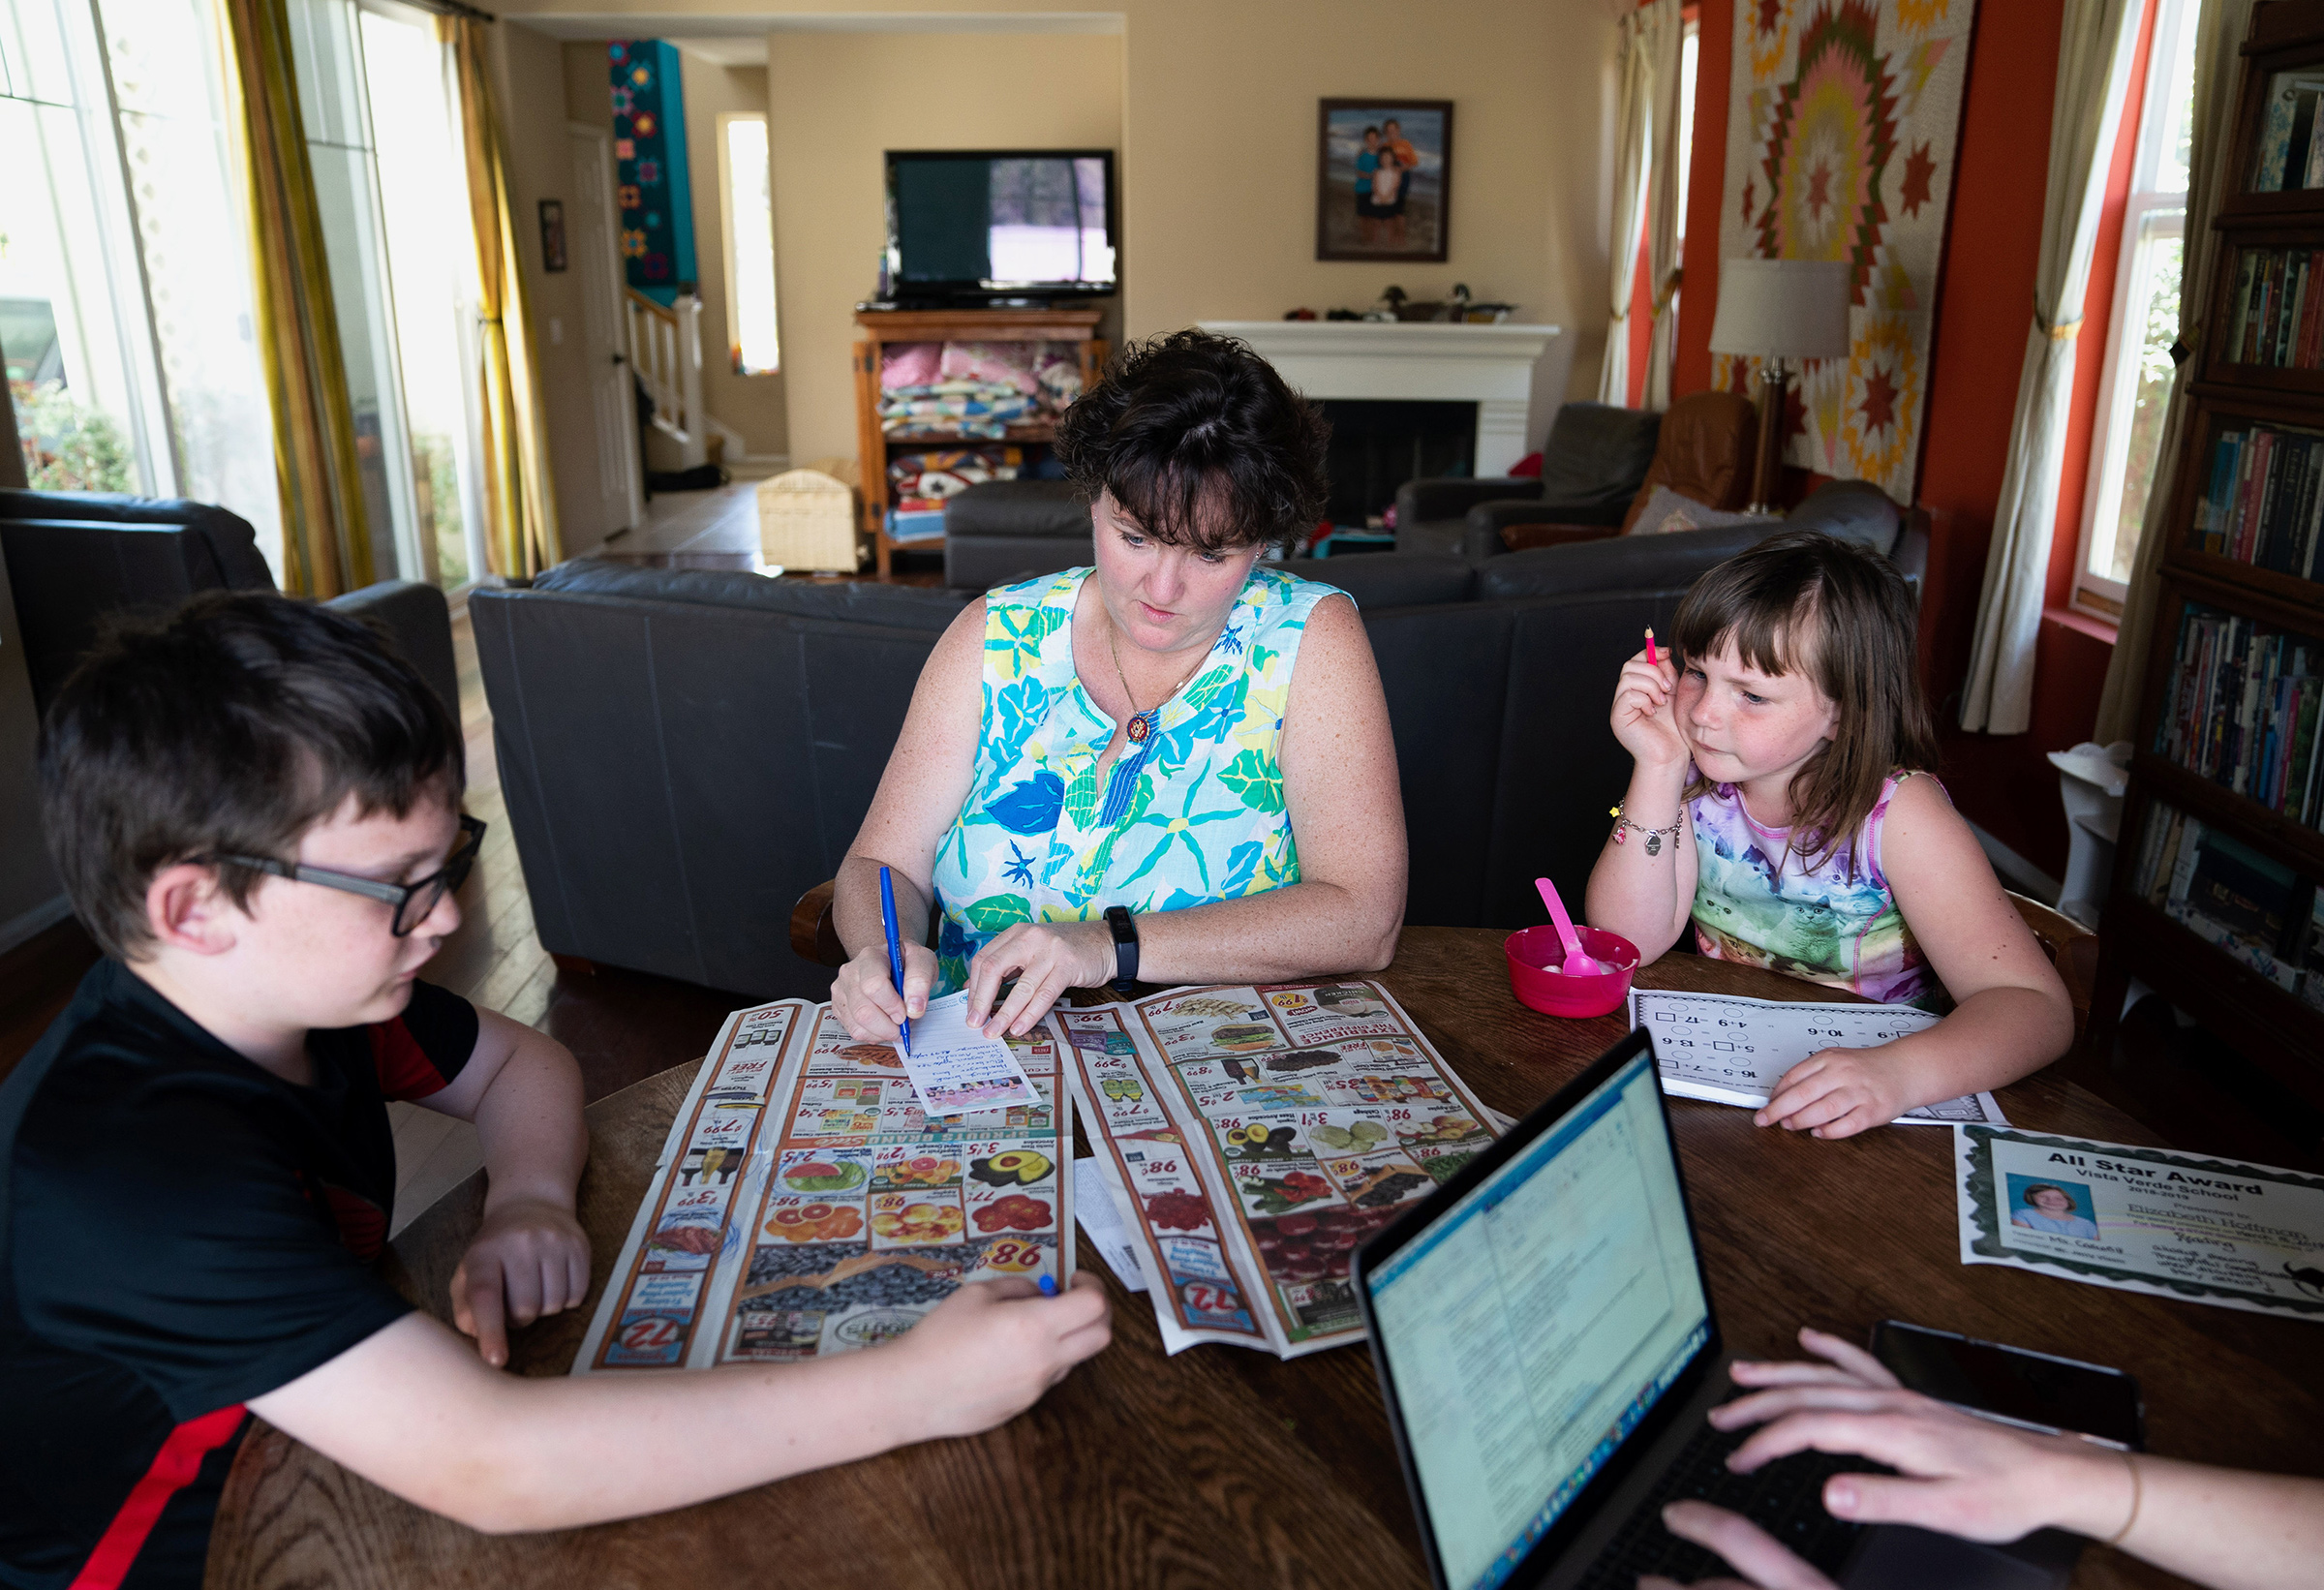 Rep. Katie Porter compiles a grocery shopping list with her son Paul and daughter Betsy at home in Irvine, Calif., on March 20, 2019